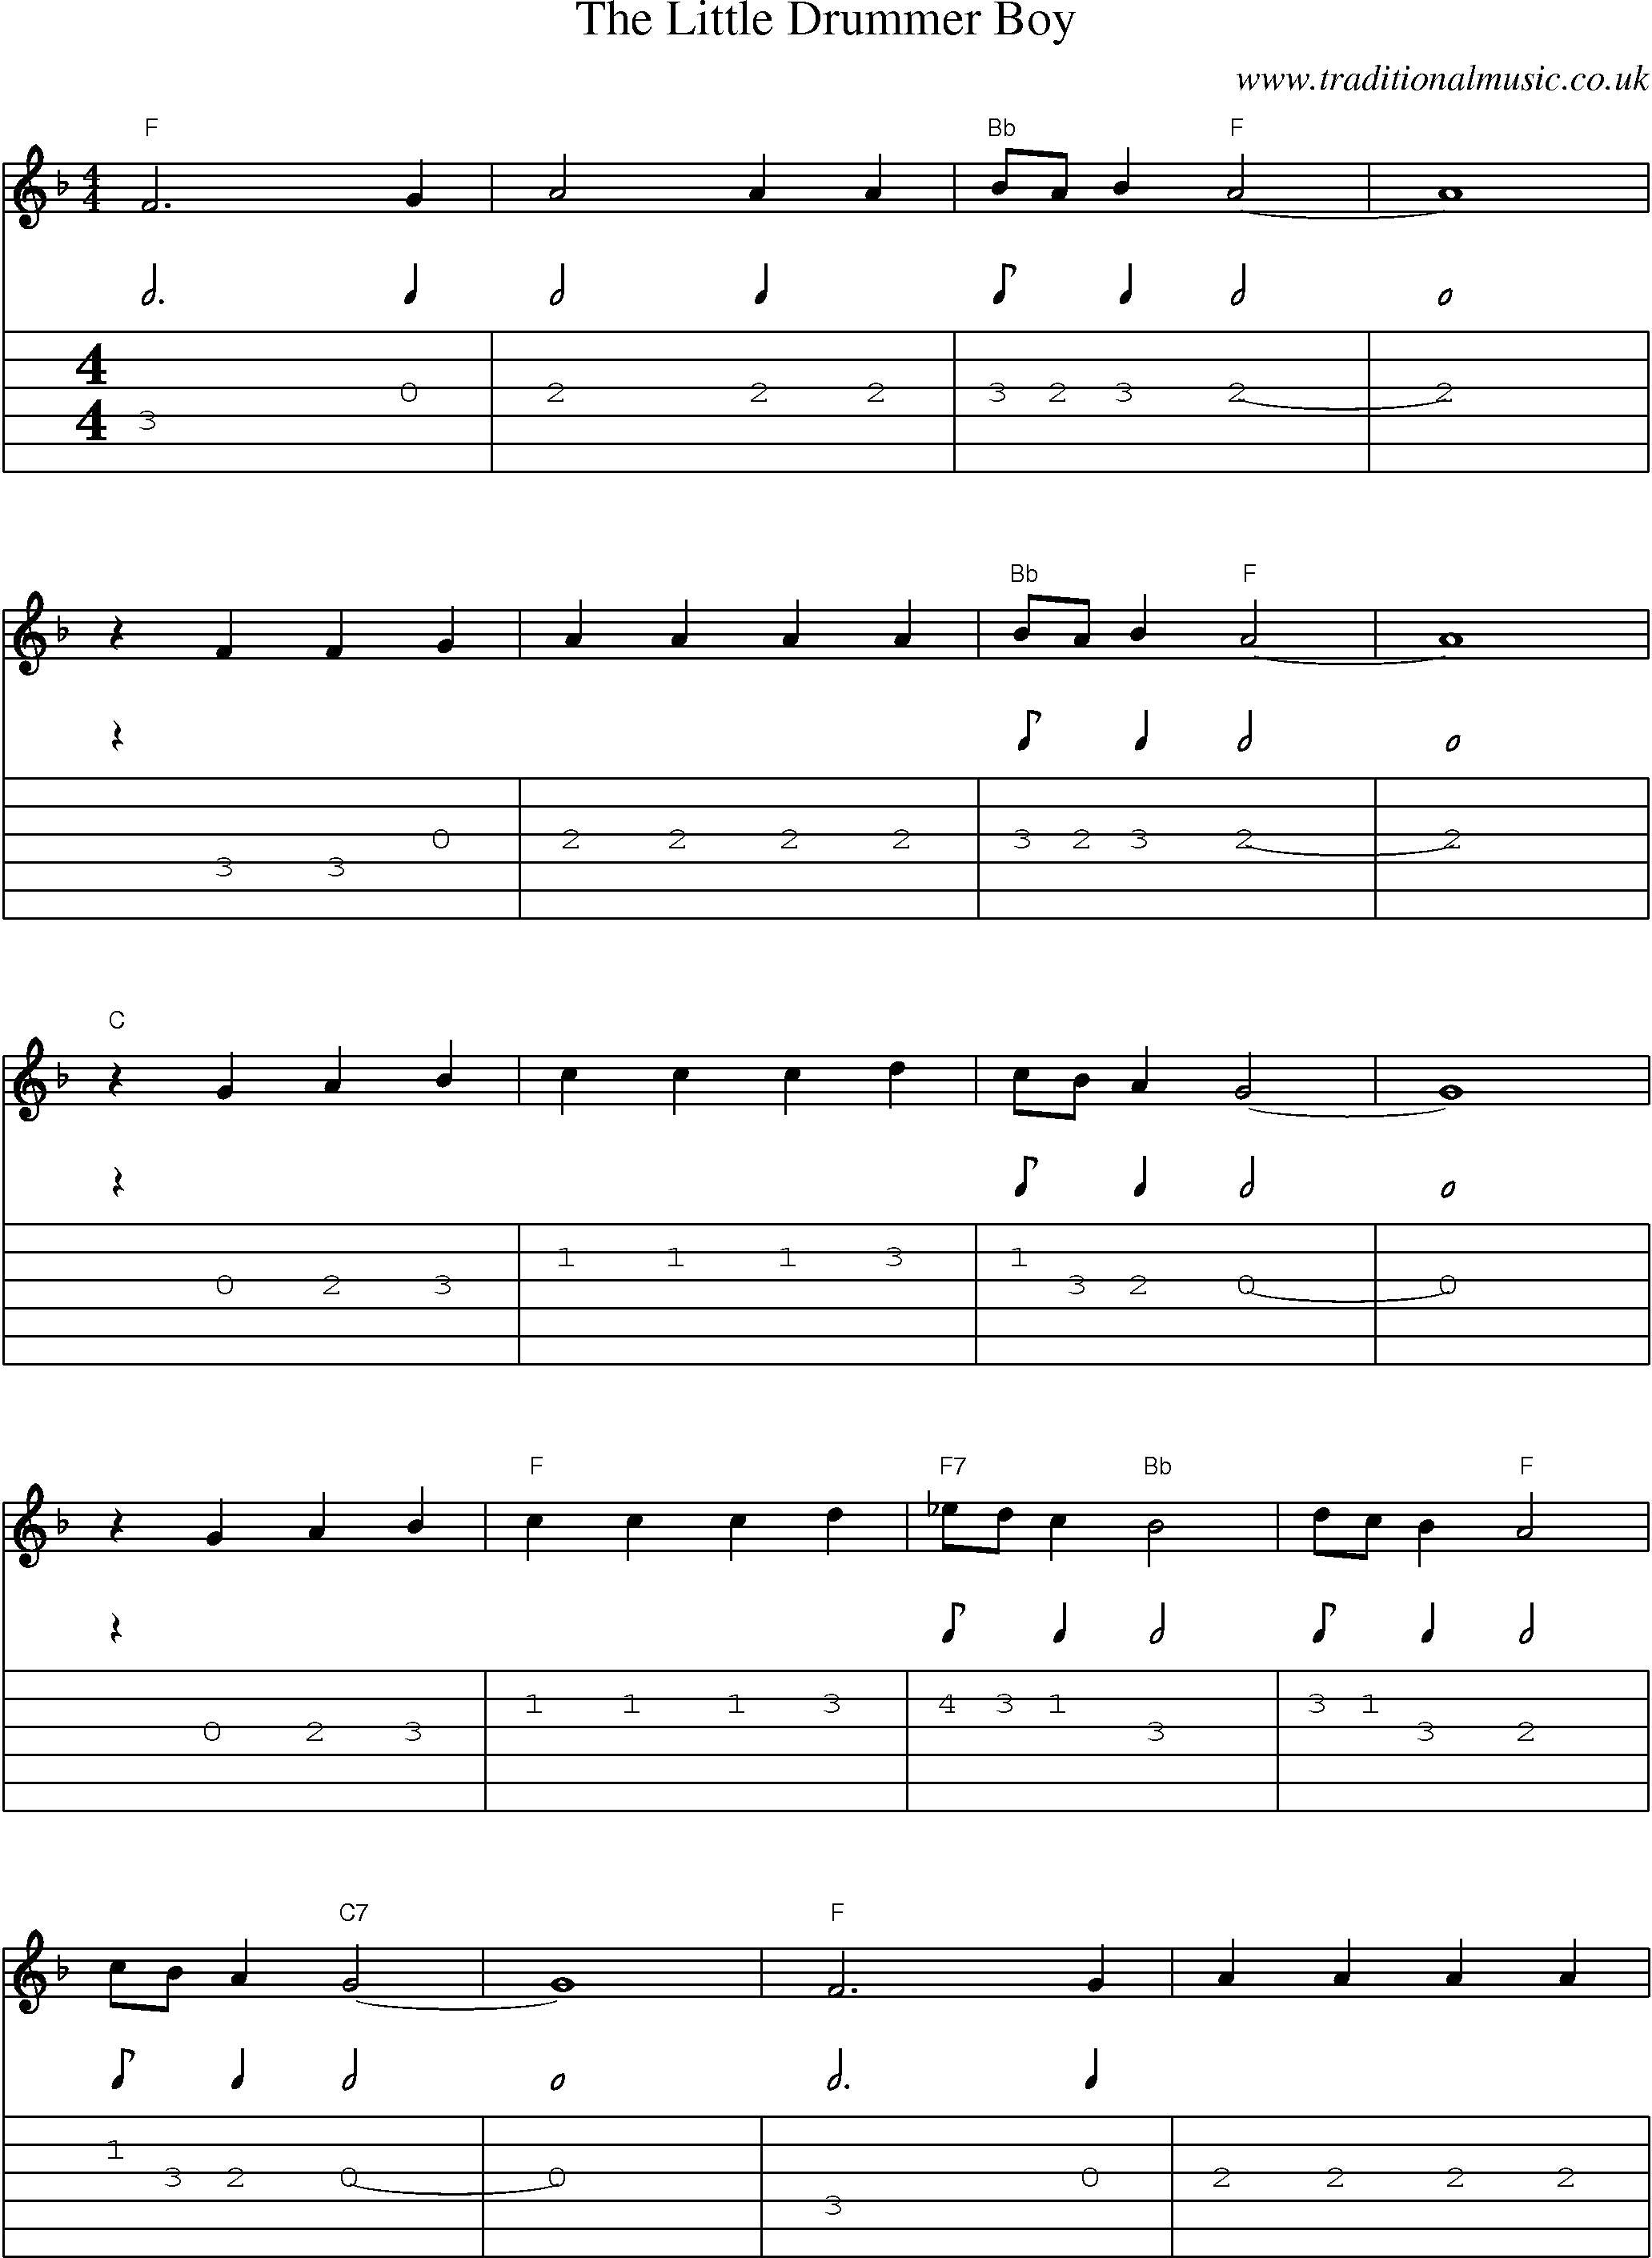 Music Score and Guitar Tabs for The Little Drummer Boy